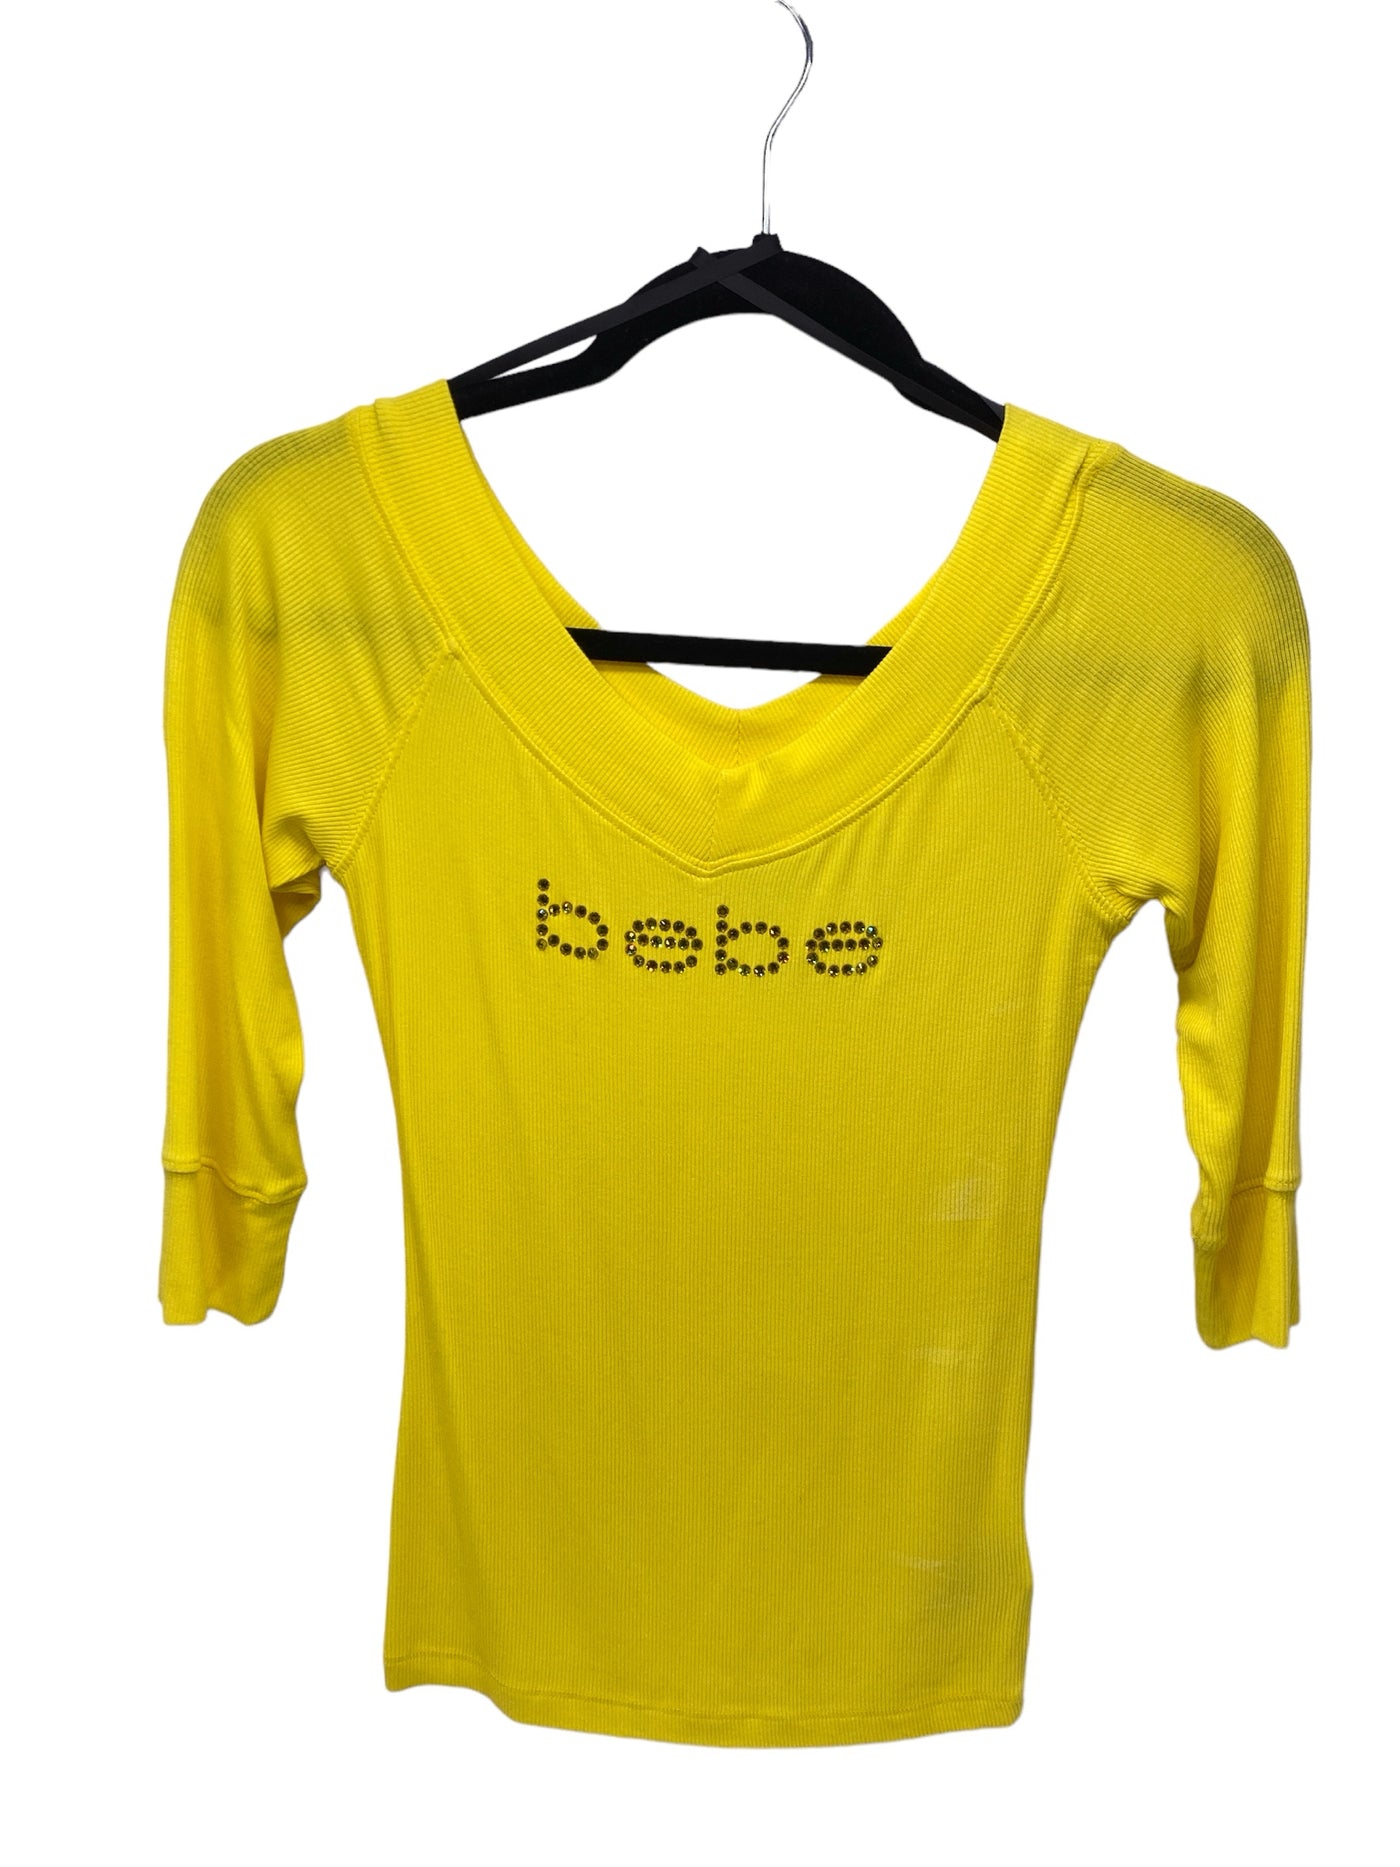 Bebe Misses Size Small Yellow 3/4 Blouse